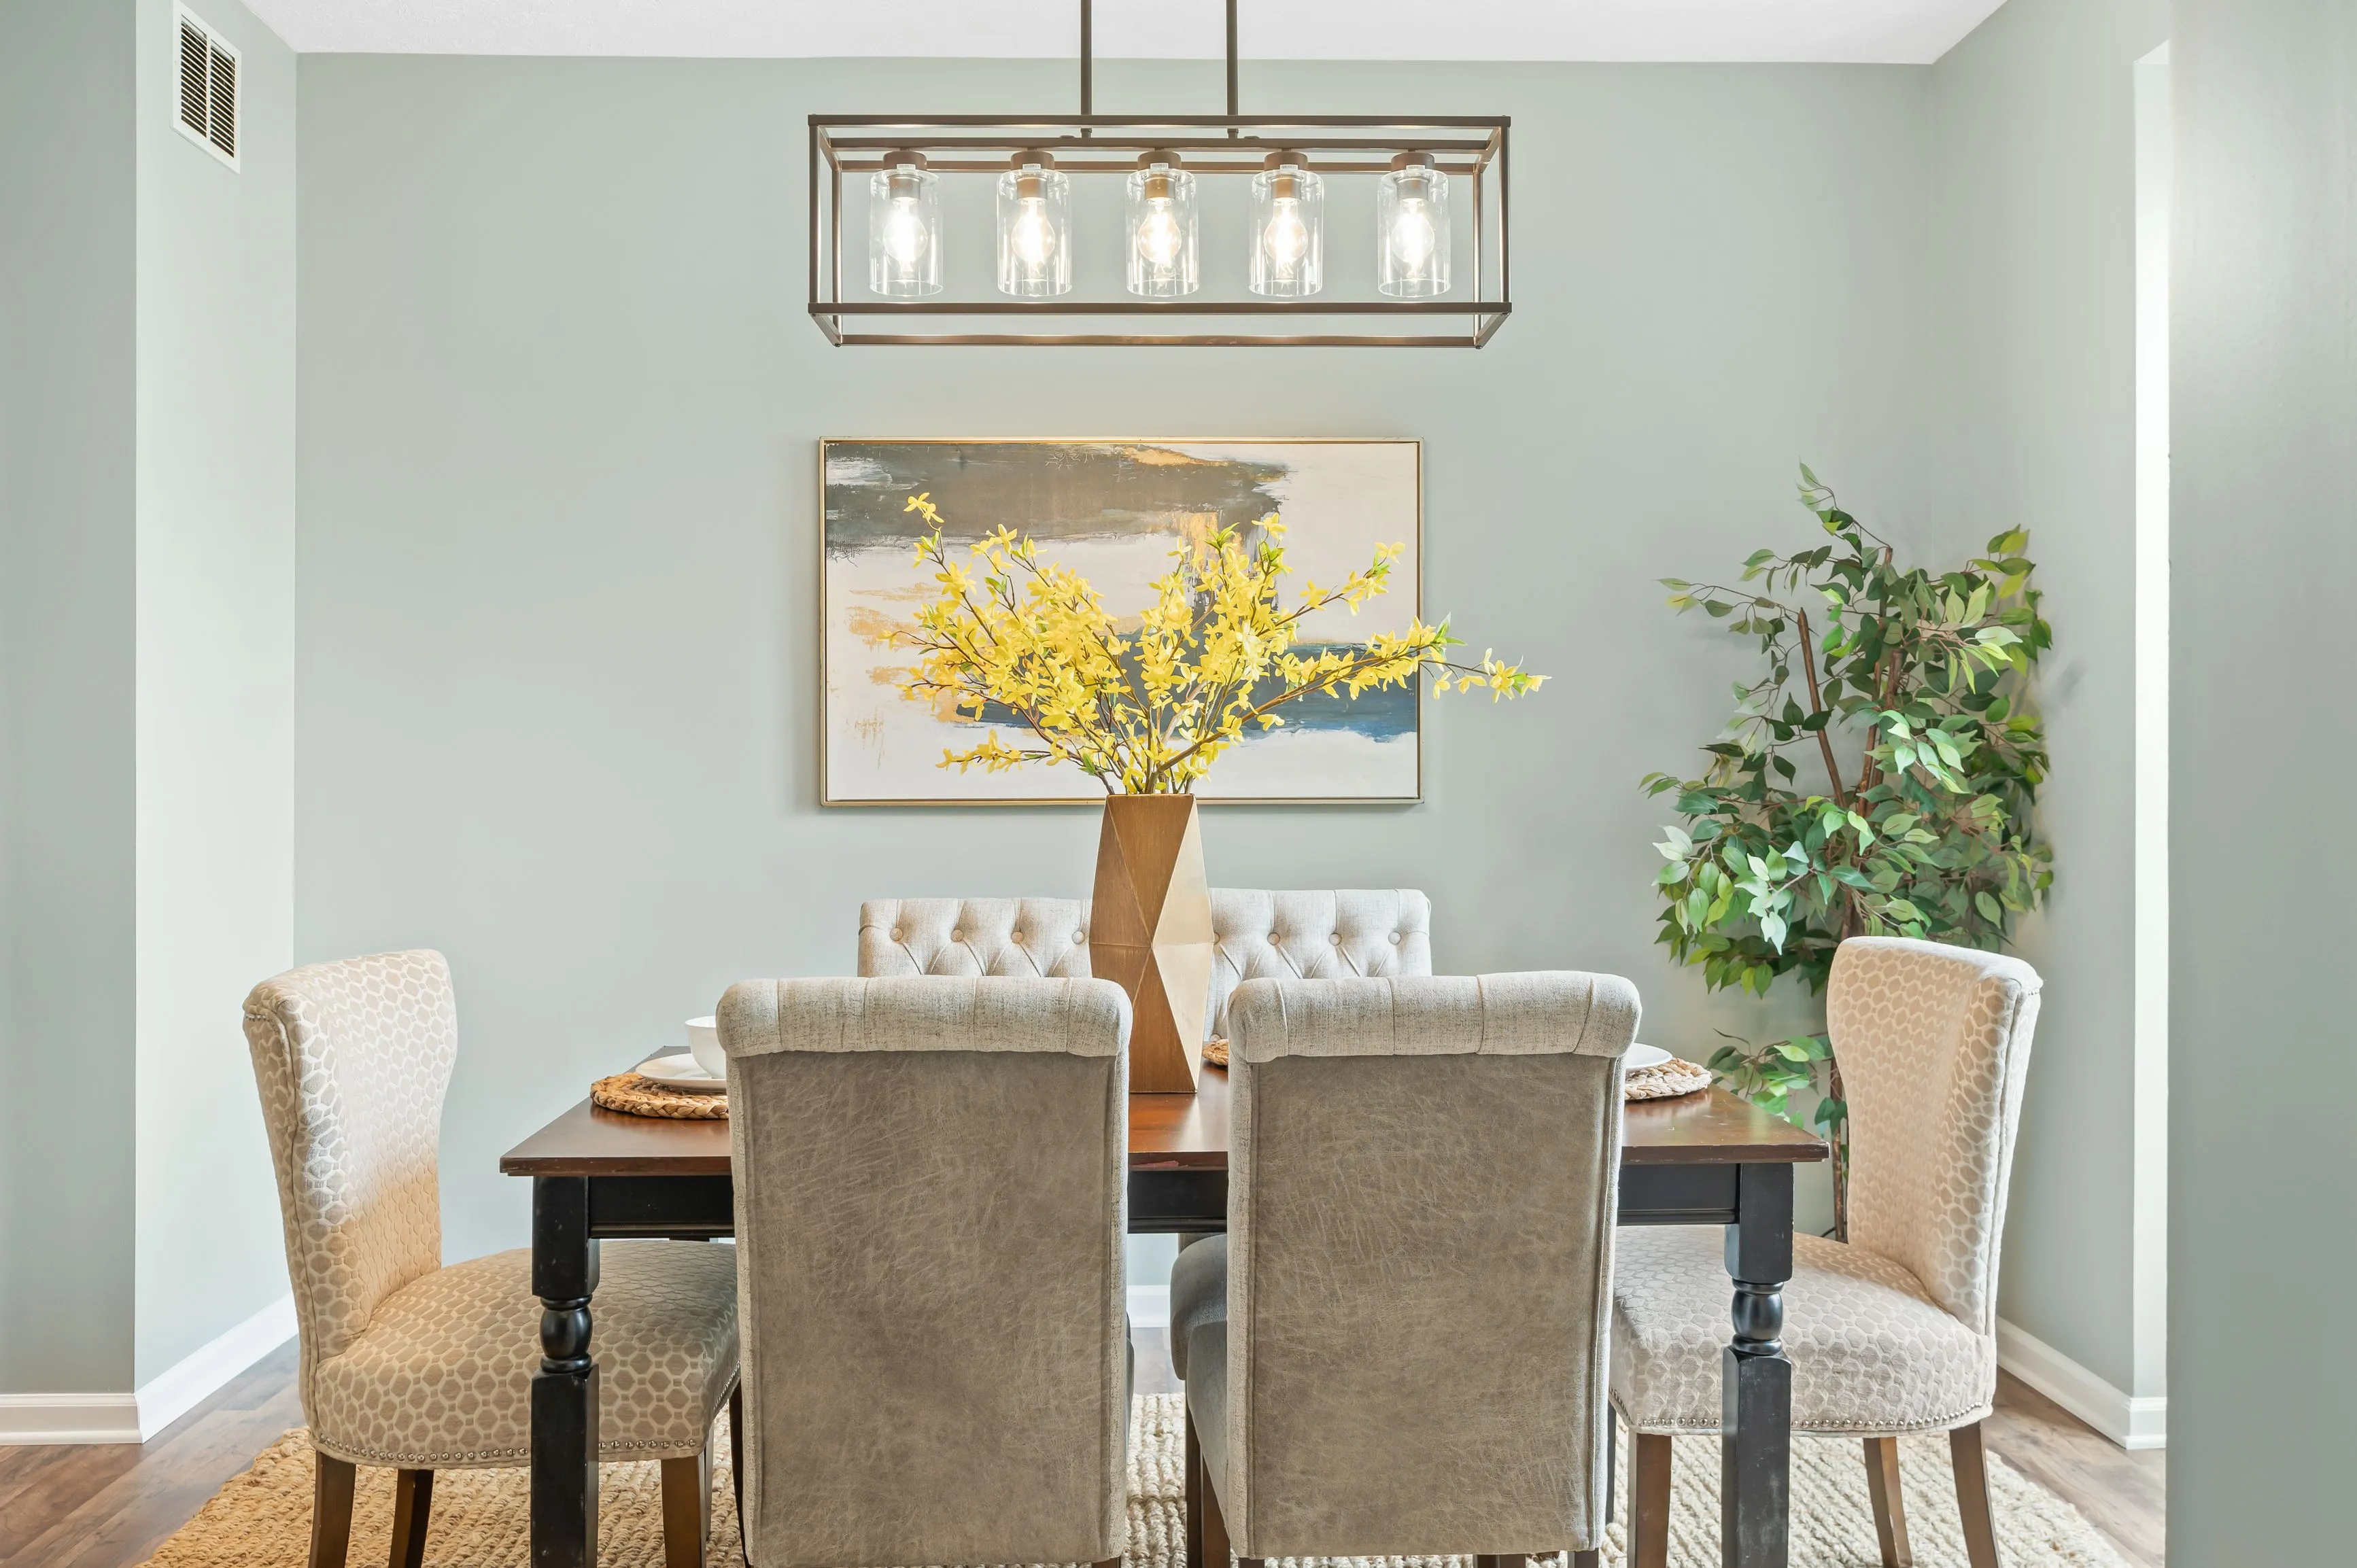 Elegant dining room with a modern chandelier, a wooden table with mixed chair styles, and a painting of a tree above a console table.